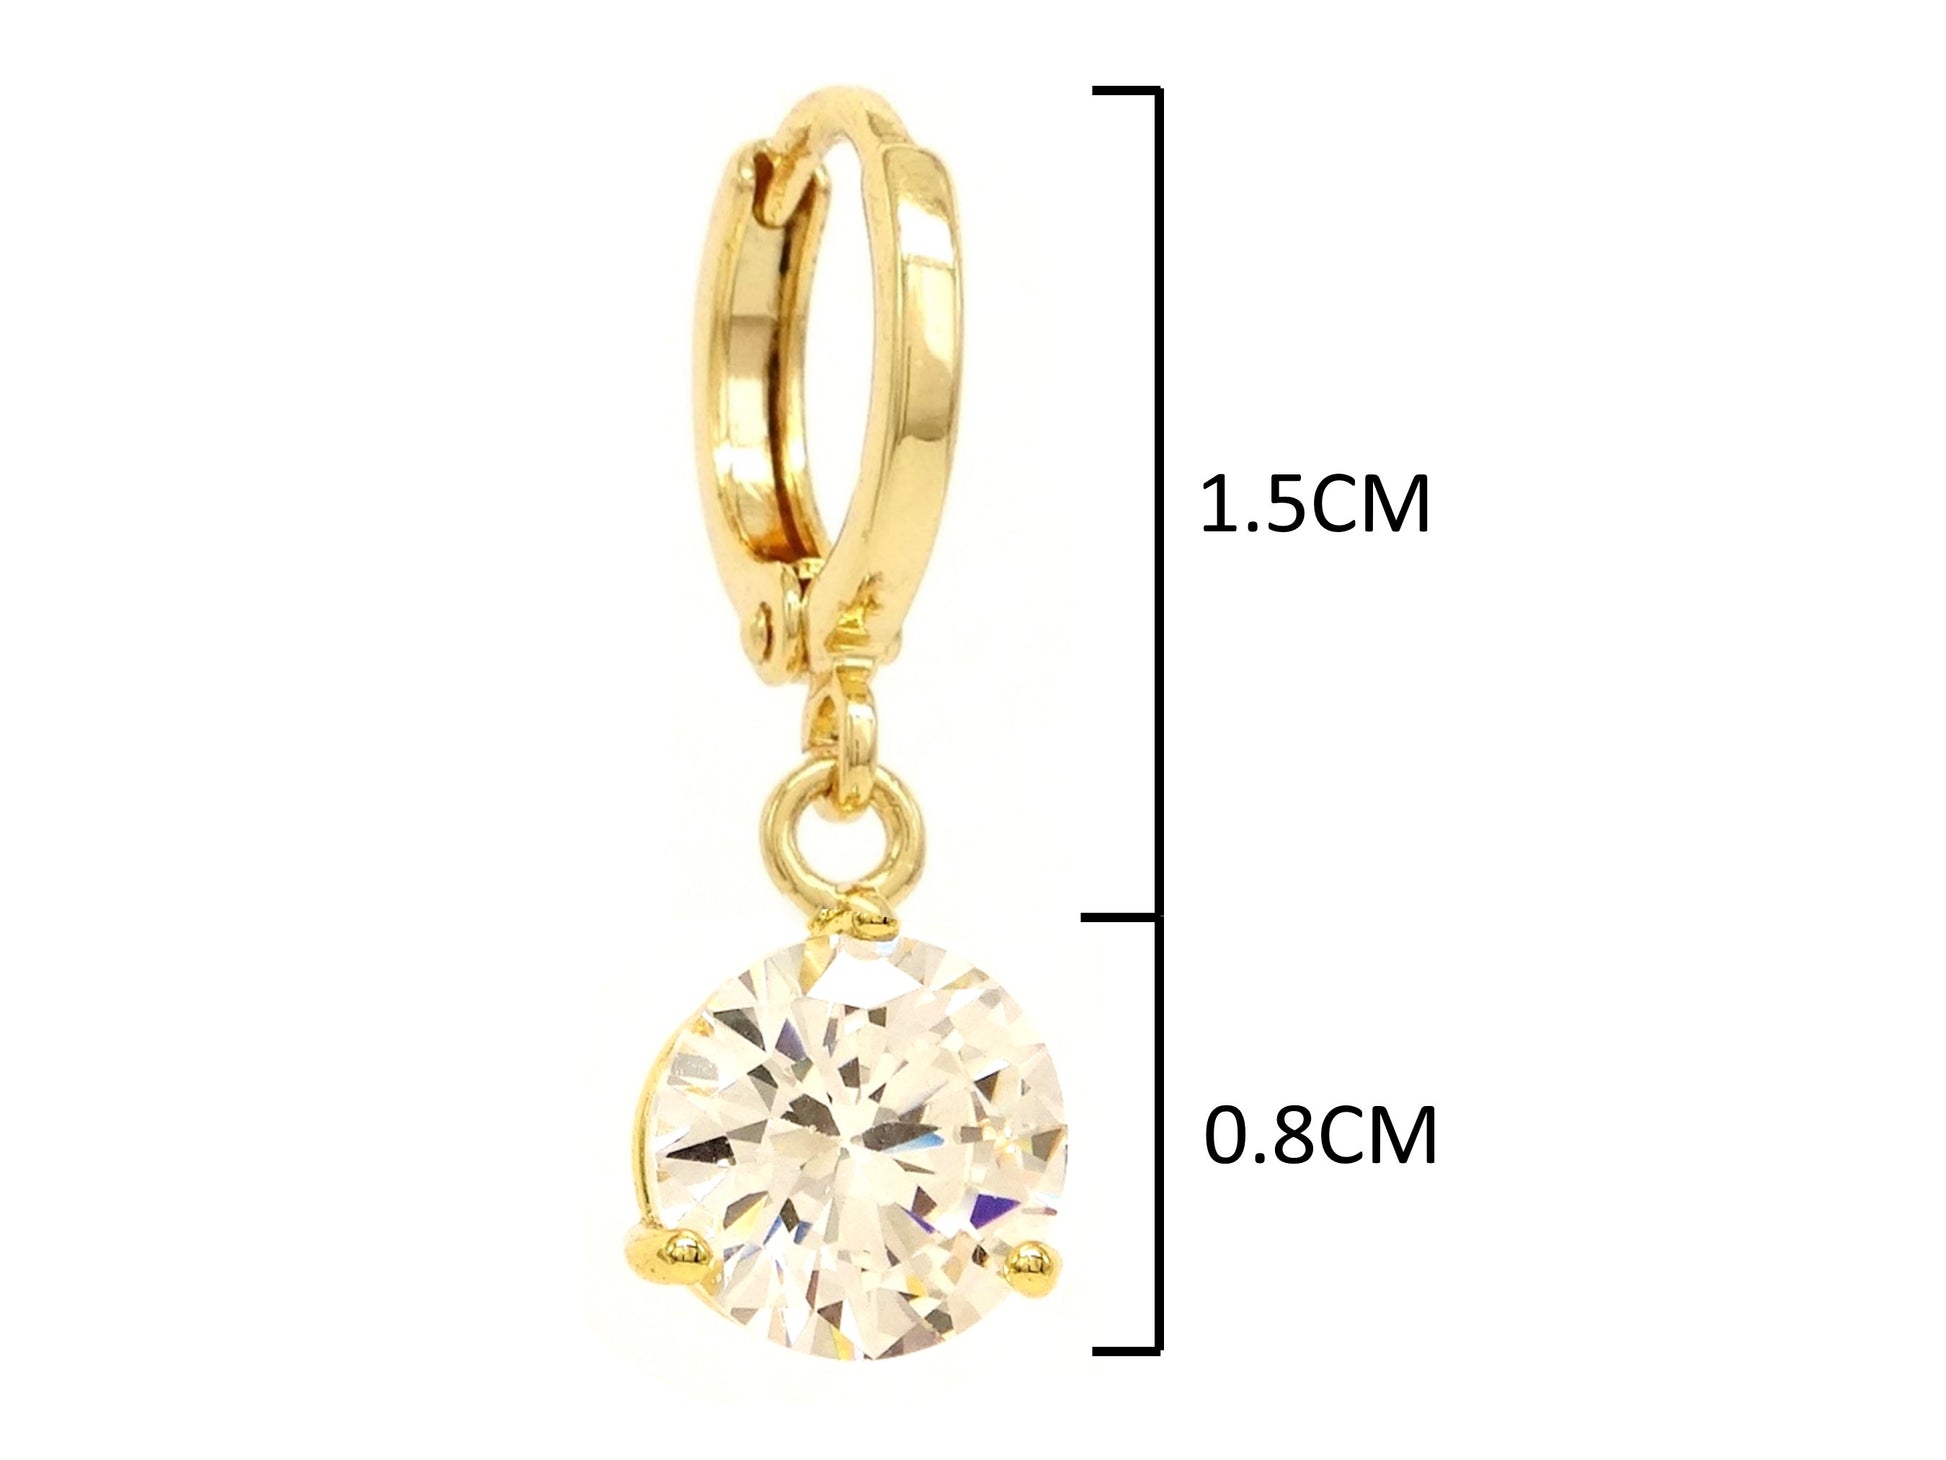 Clear gem gold necklace and earrings MEASUREMENT